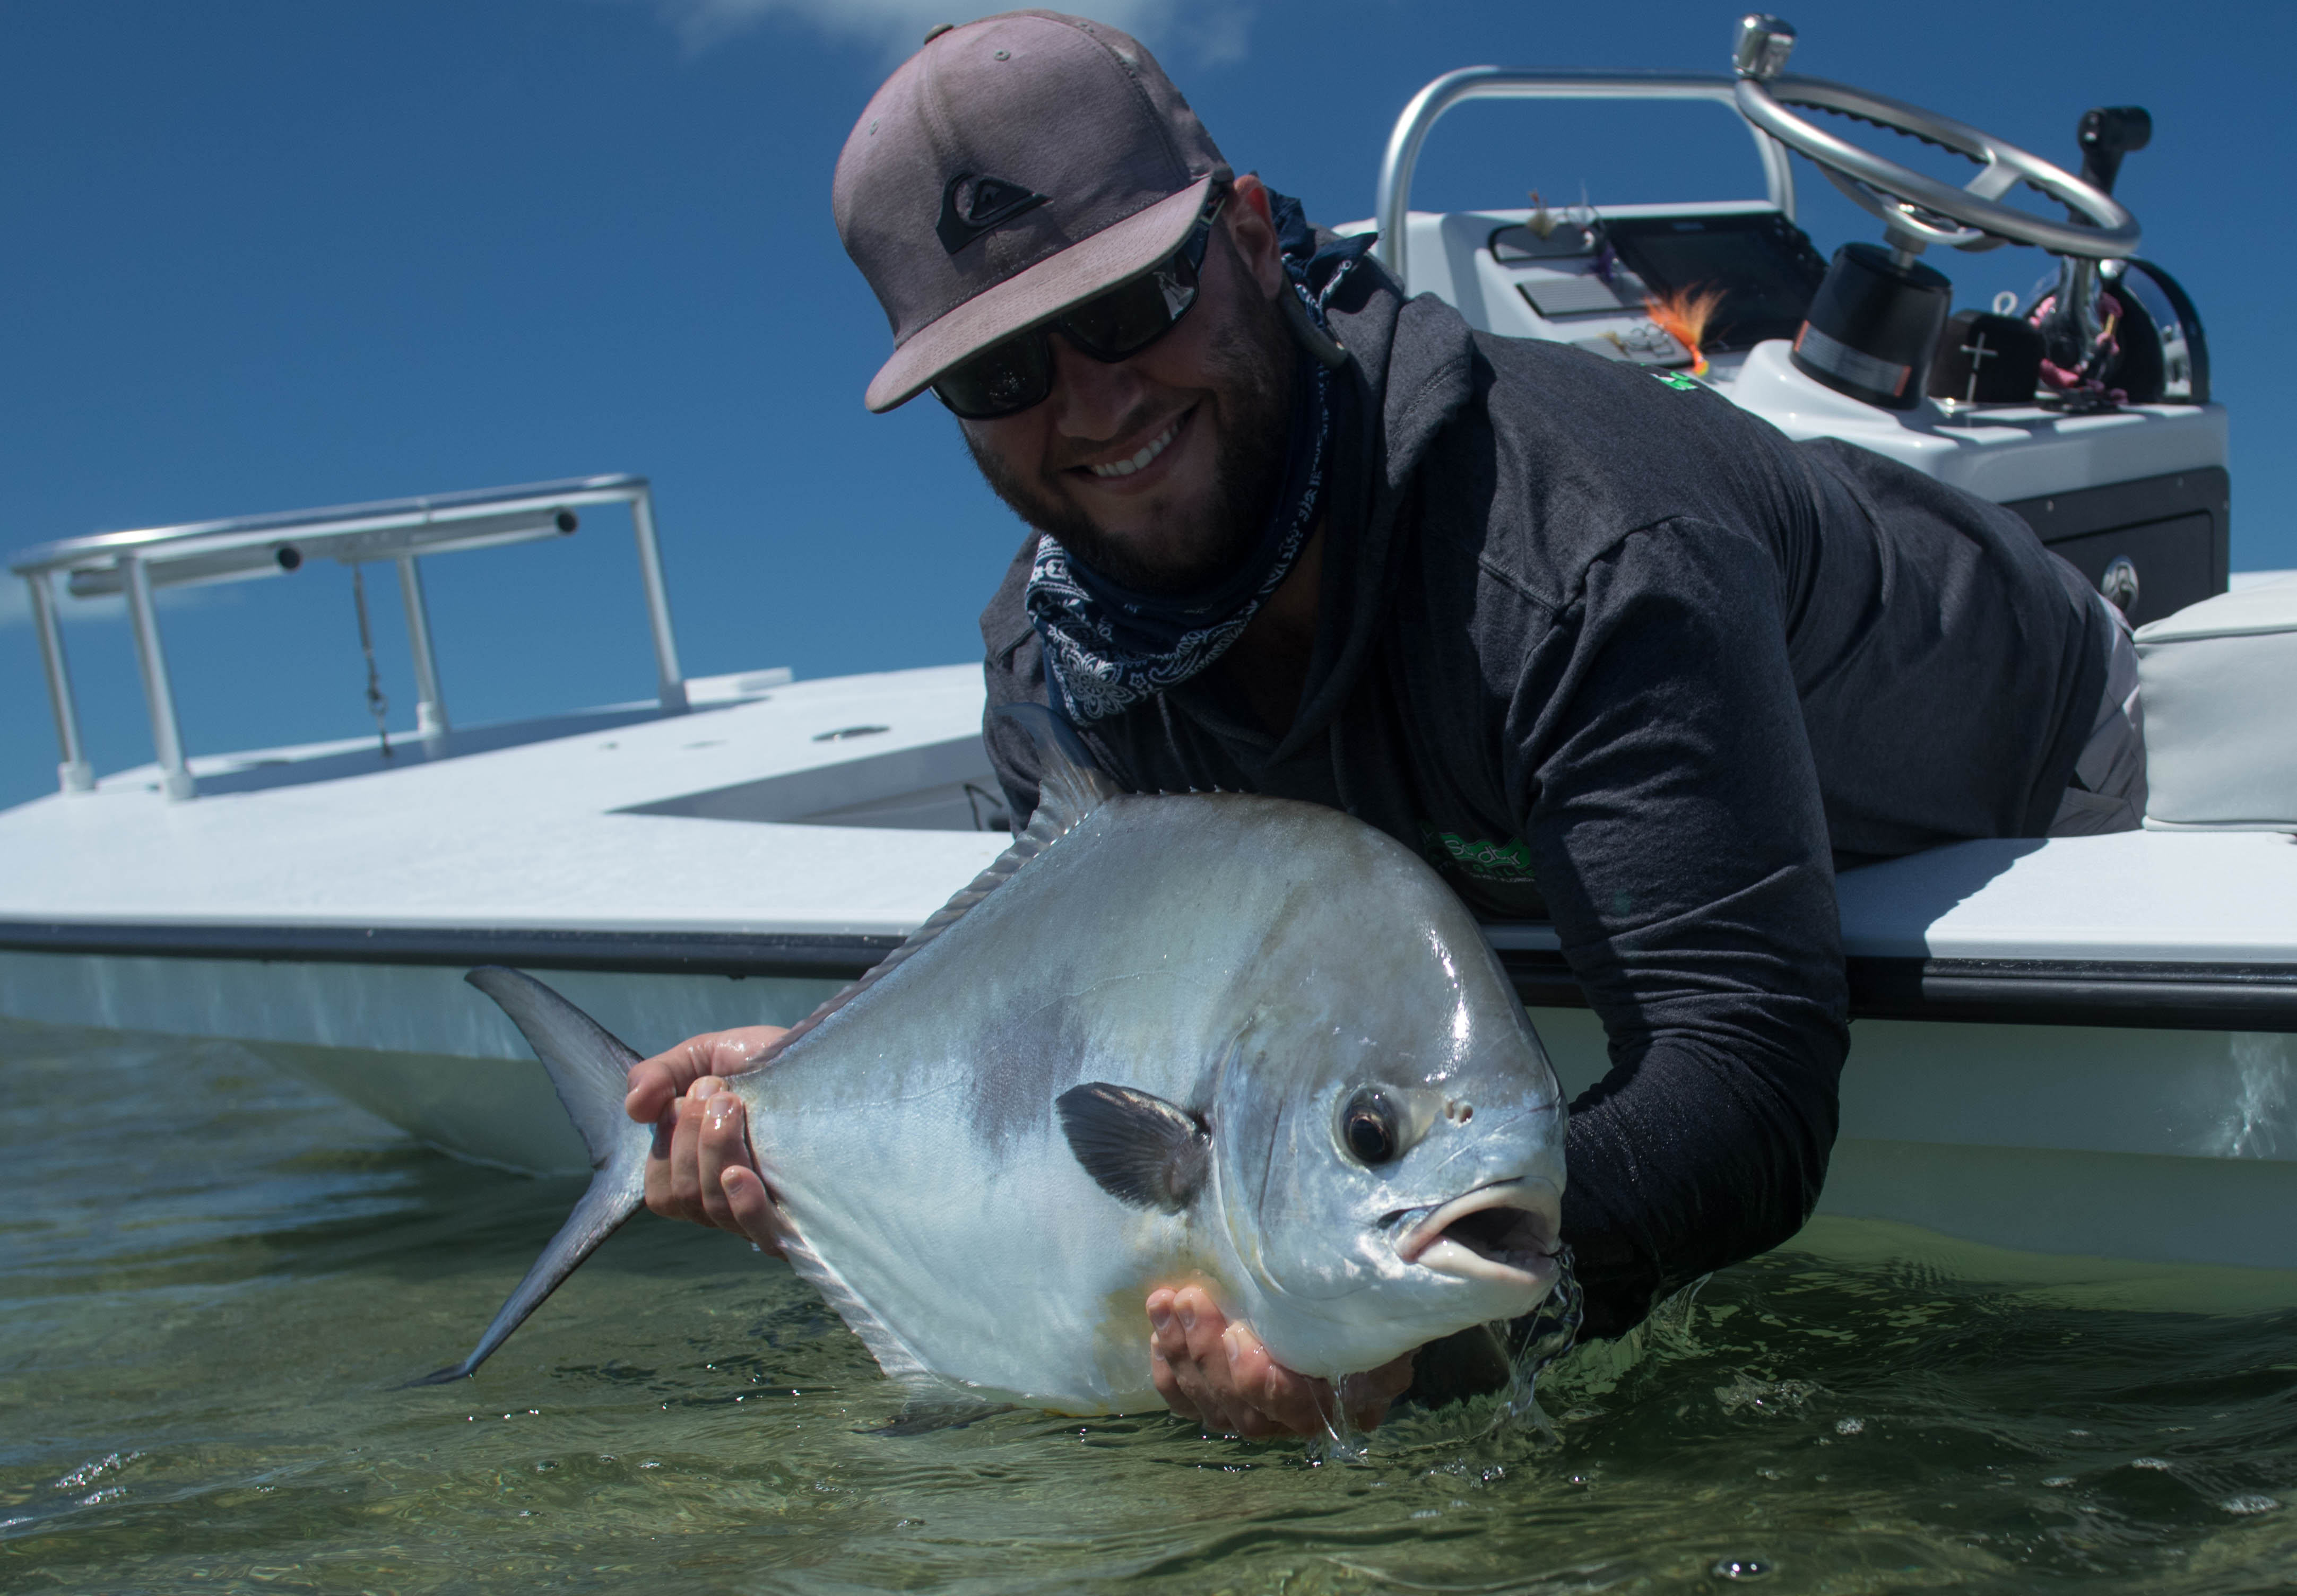 Taylor is holding a nice permit he caught while sight fishing in the Florida Keys